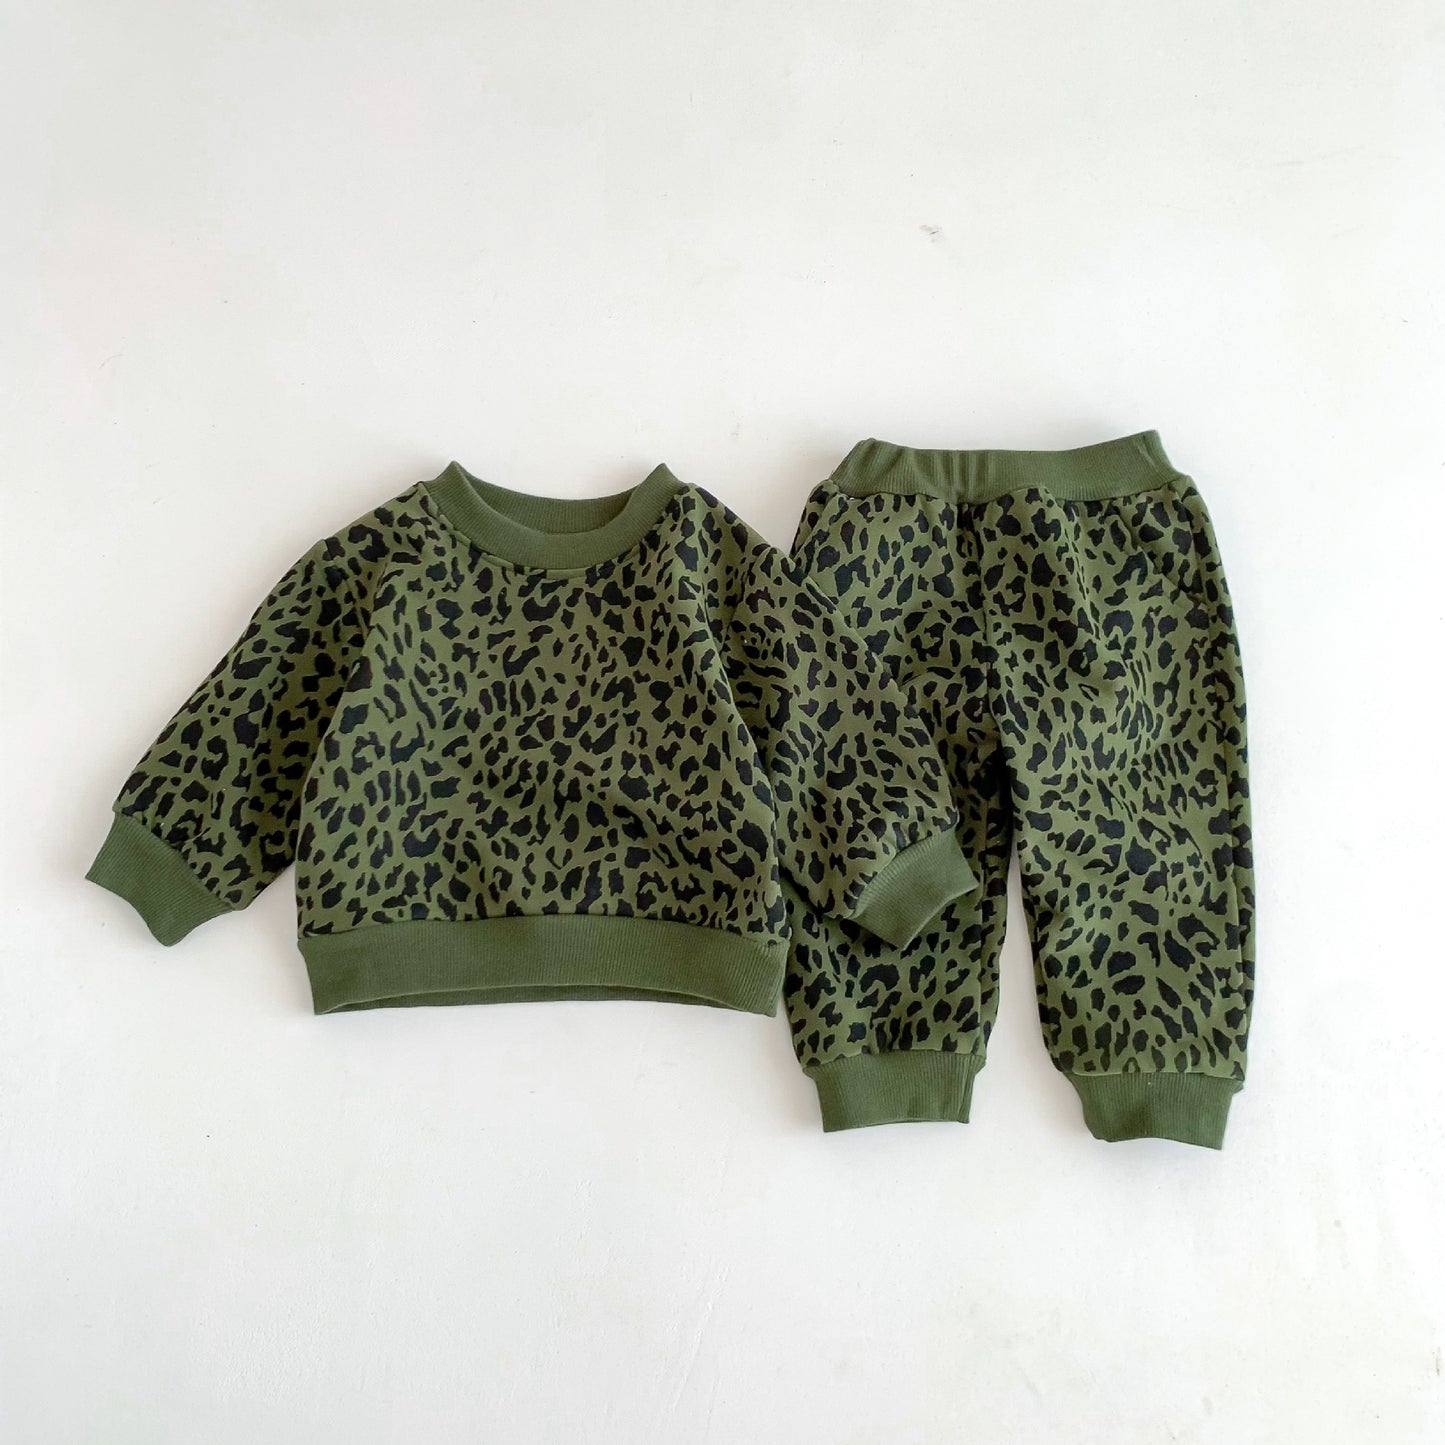 Children's Fall Outfits Baby Boys Girls Pullover Crew Neck Top Trousers Outdoor Sportswear